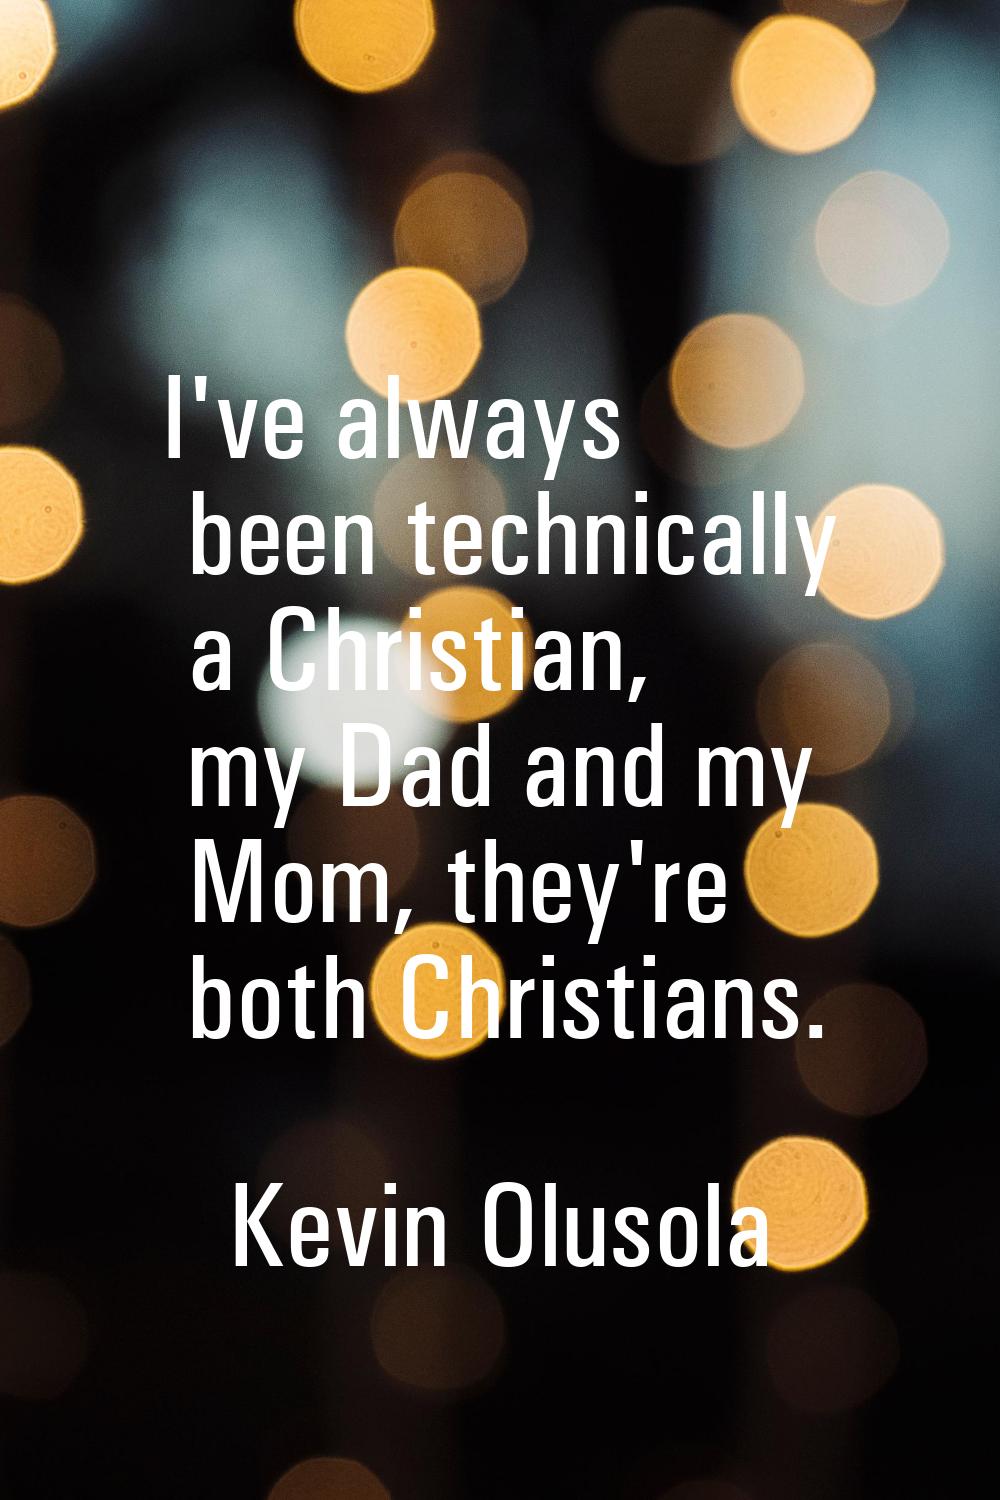 I've always been technically a Christian, my Dad and my Mom, they're both Christians.